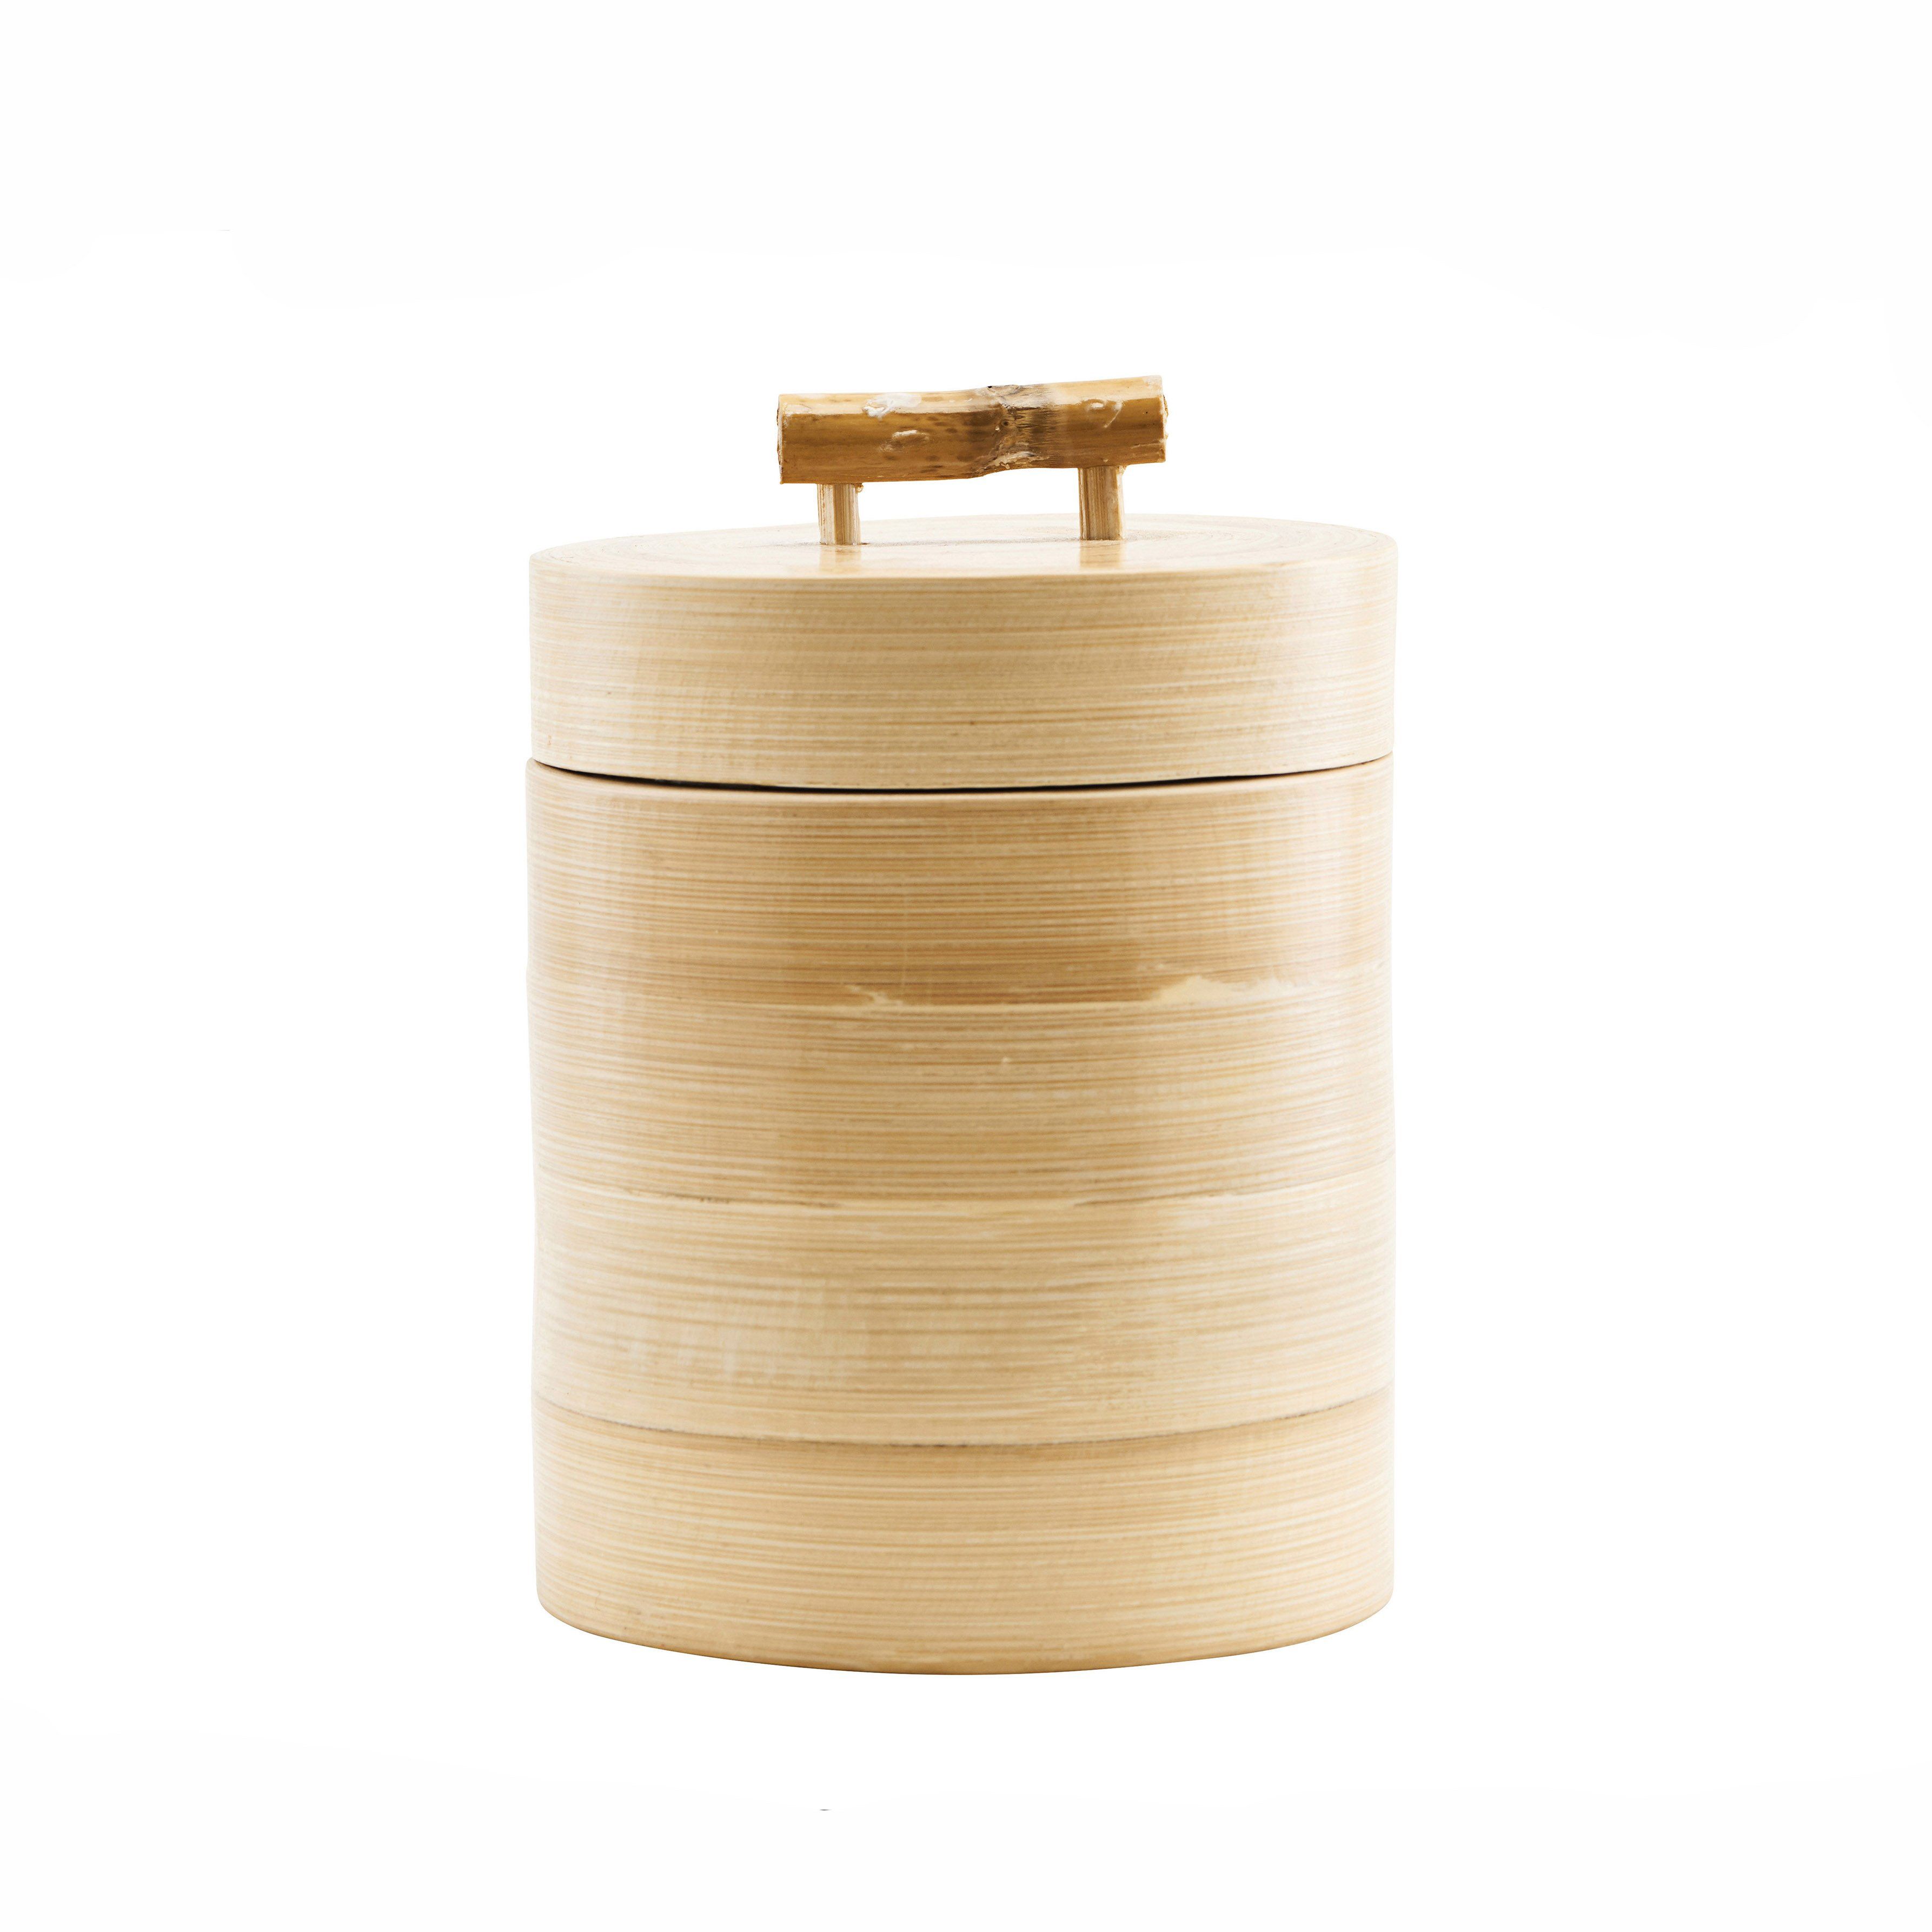 House Doctor Tall Lidded Wooden Storage with Bamboo Handle - Trouva | Trouva (Global)